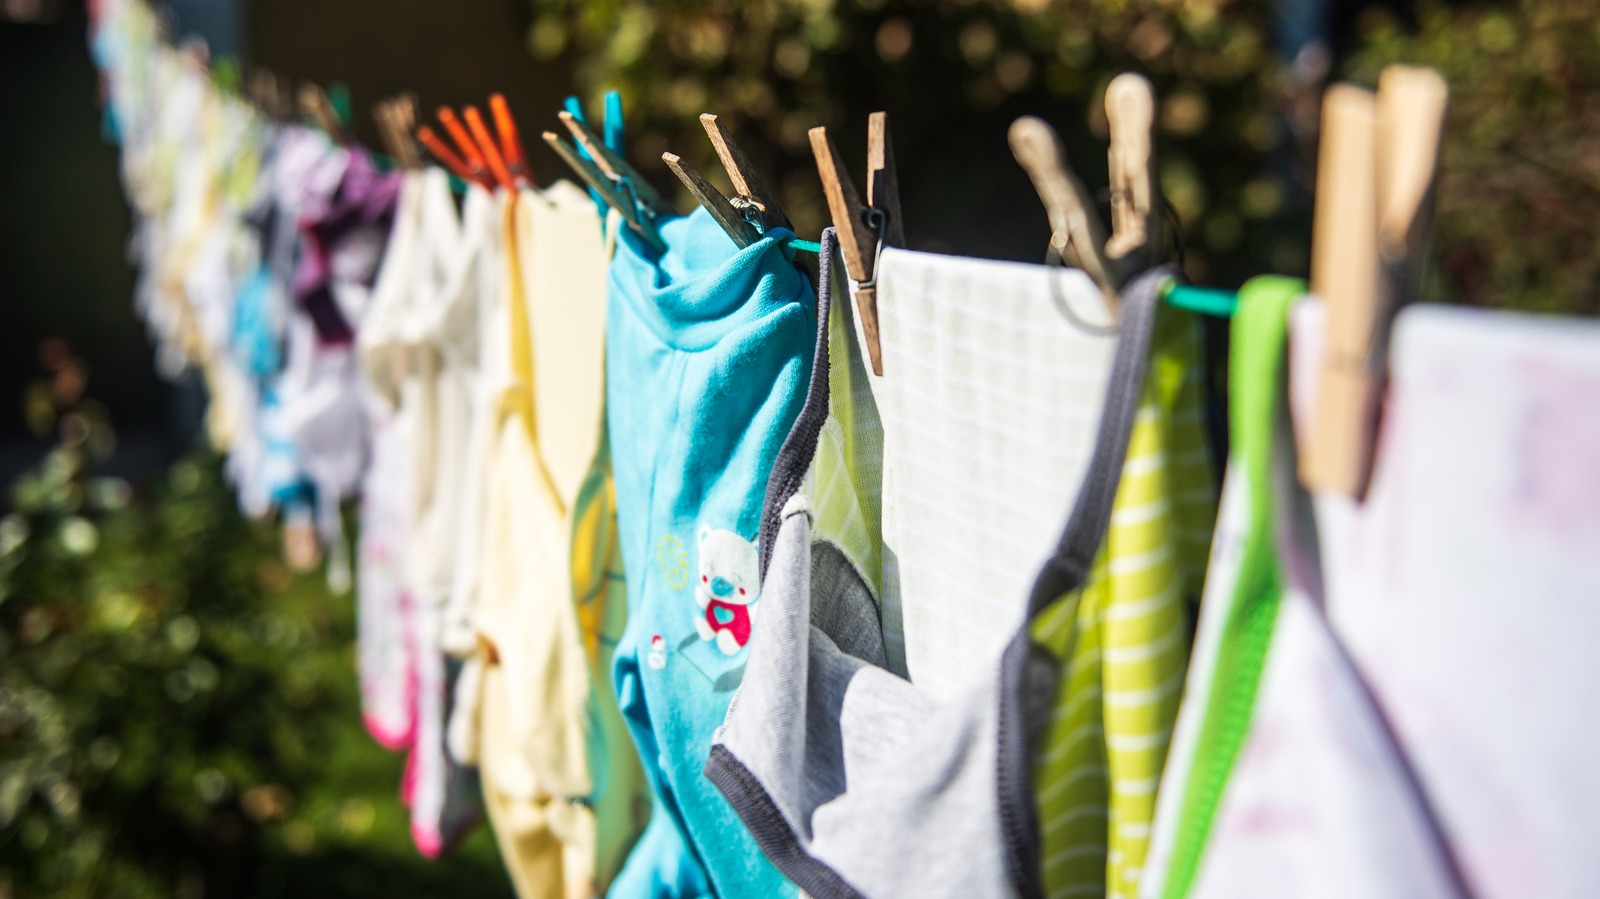 Top Line-Drying Laundry Problems Solved